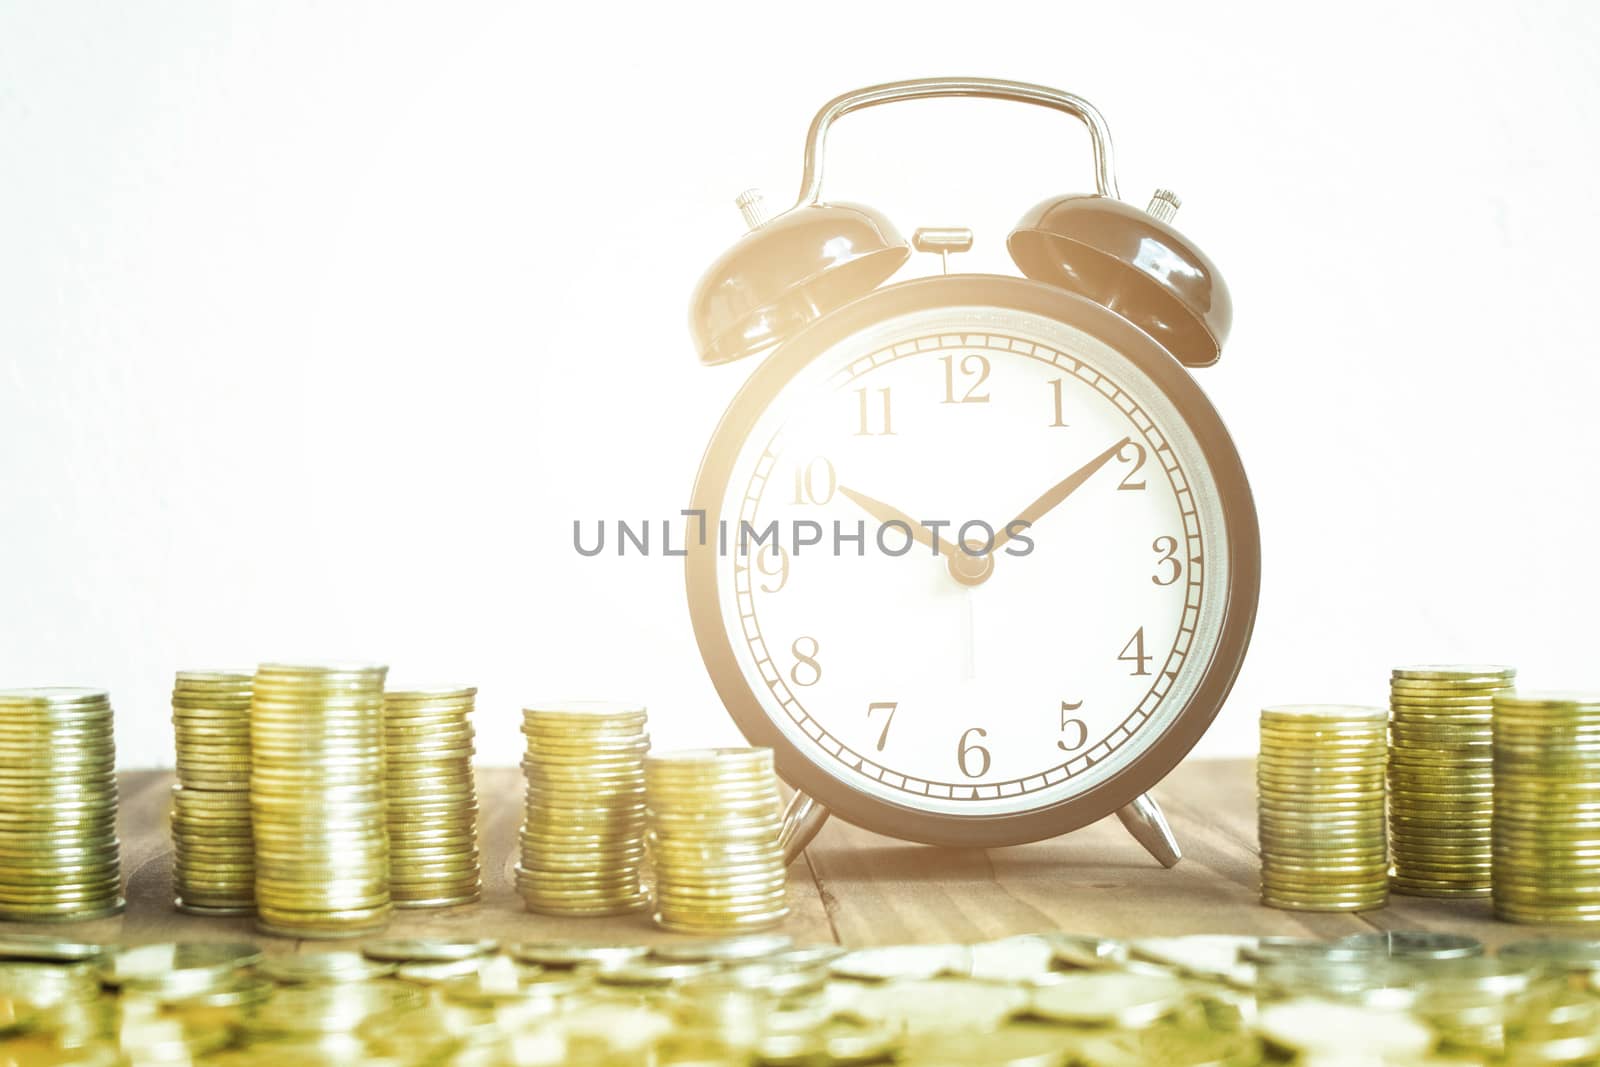 Stack Of Gold Coins With Black Fashioned Alarm Clock For Display by rakoptonLPN